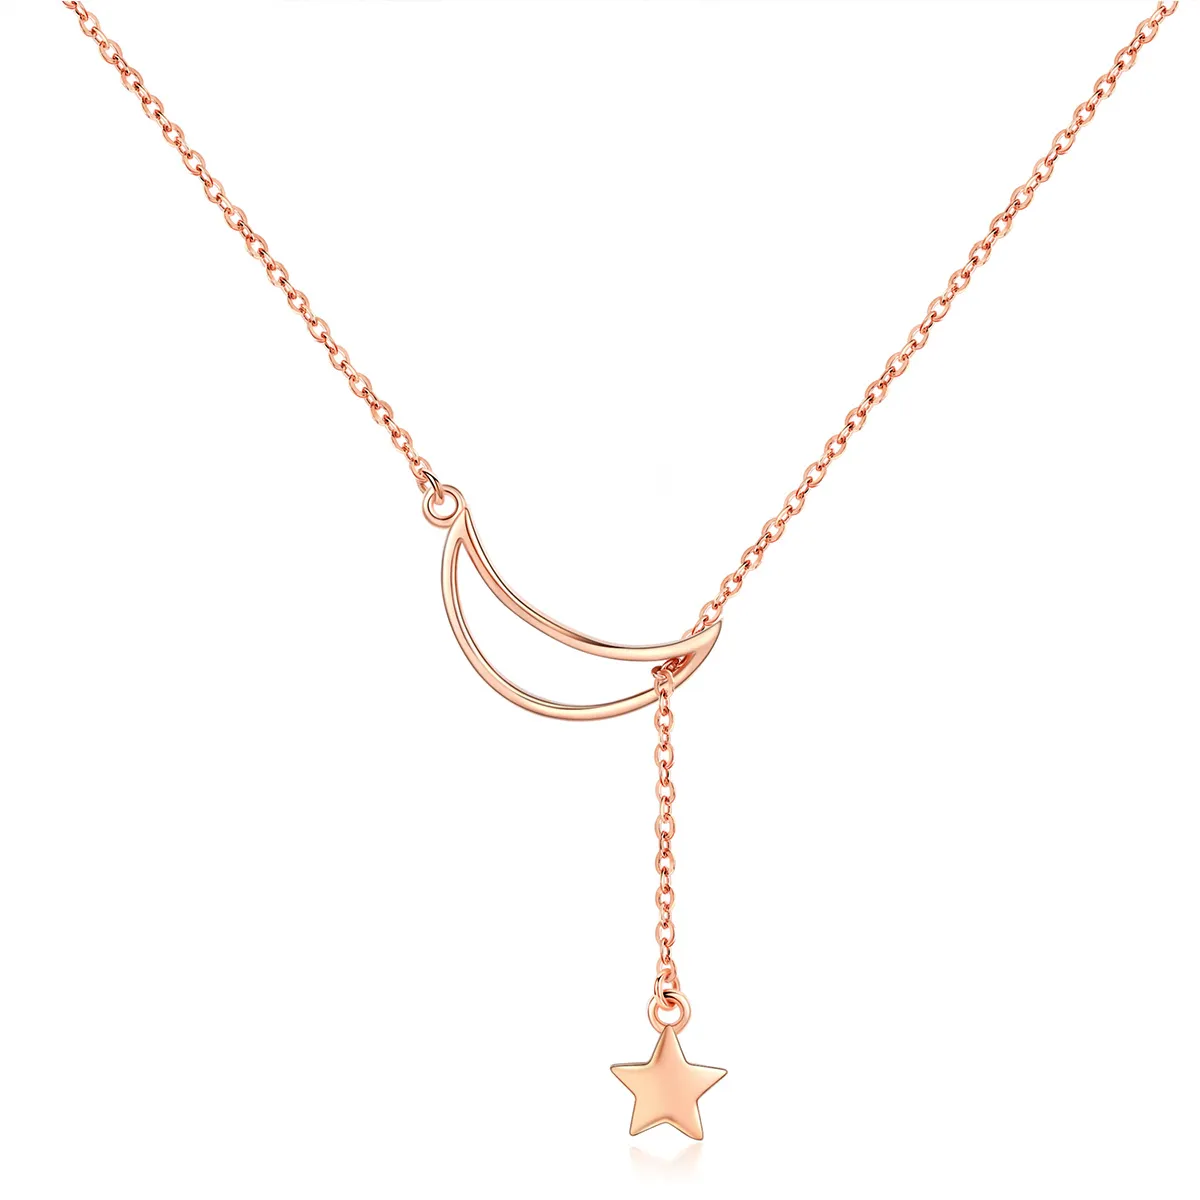 Pandora Style Rose Gold Starry Moon Chain Necklace - SCN108-C